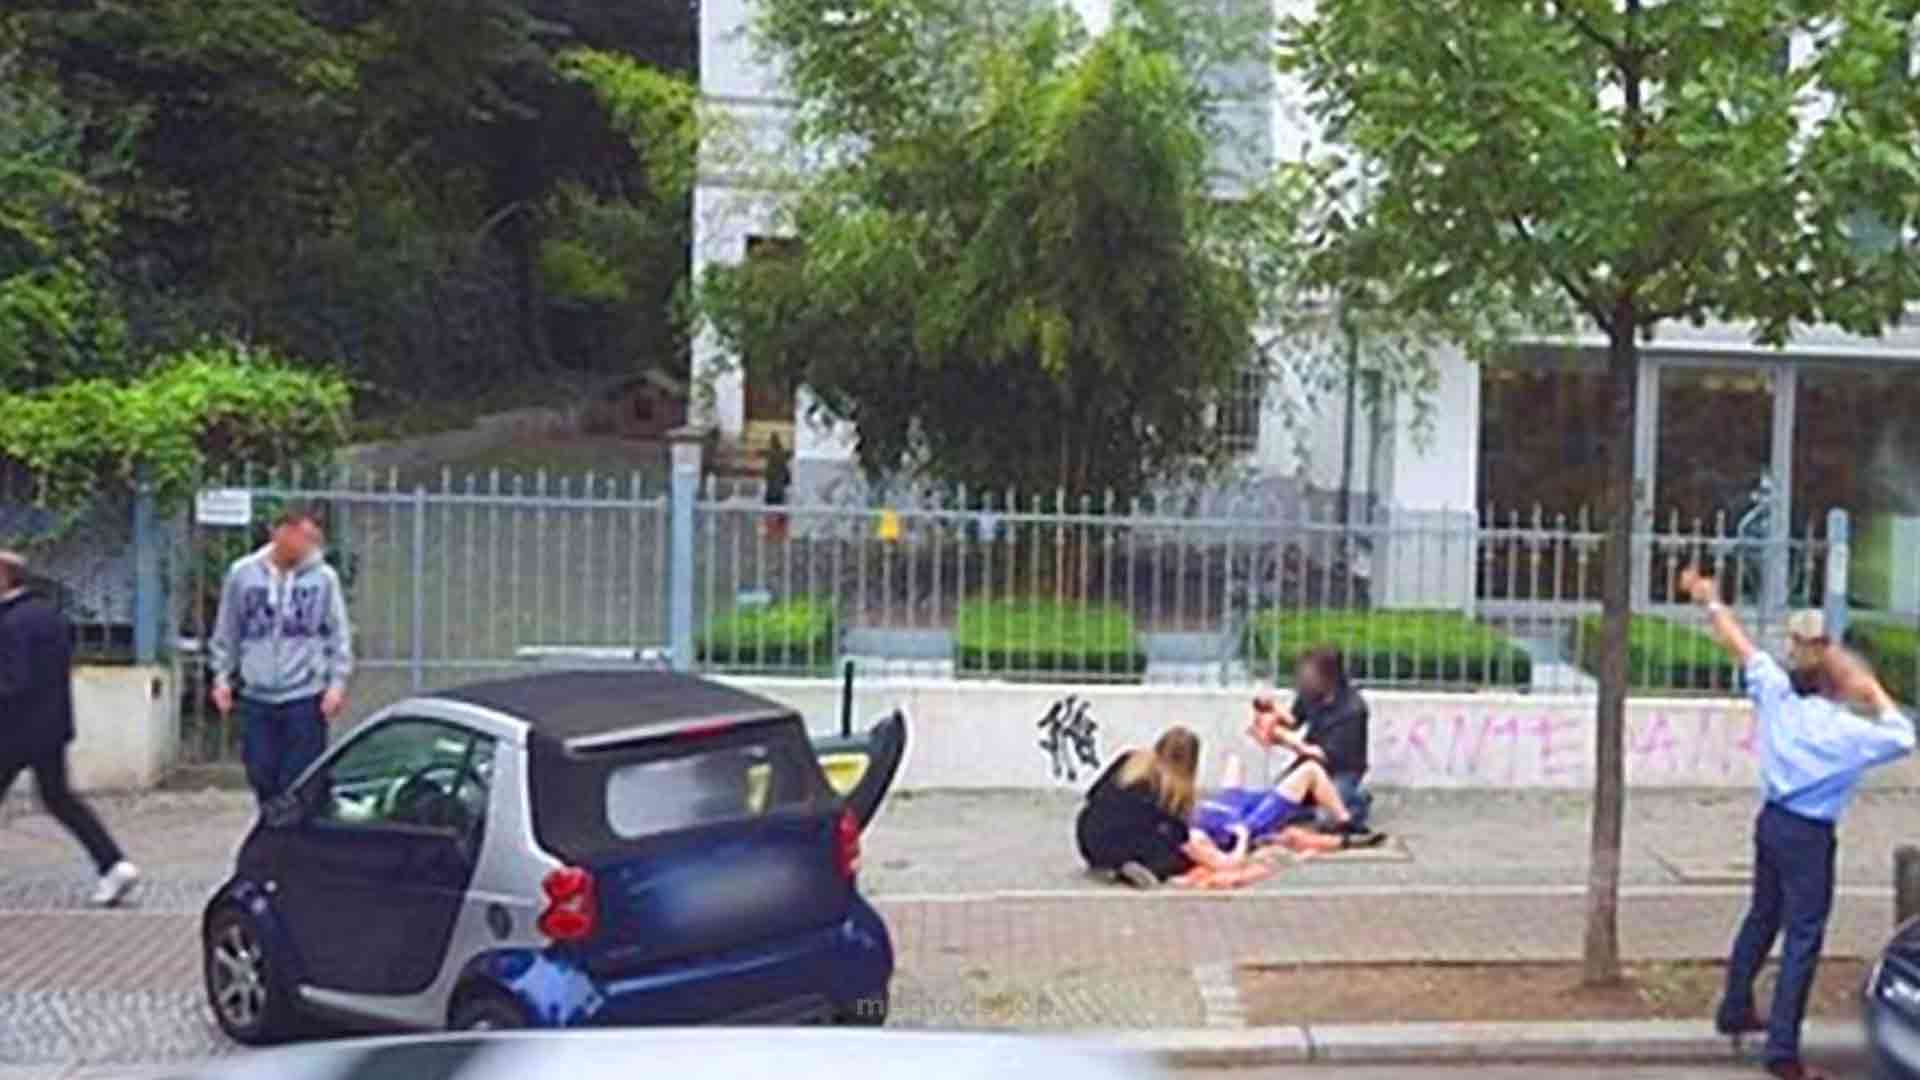 Birth of Baby Captured on Google Street View in Germany